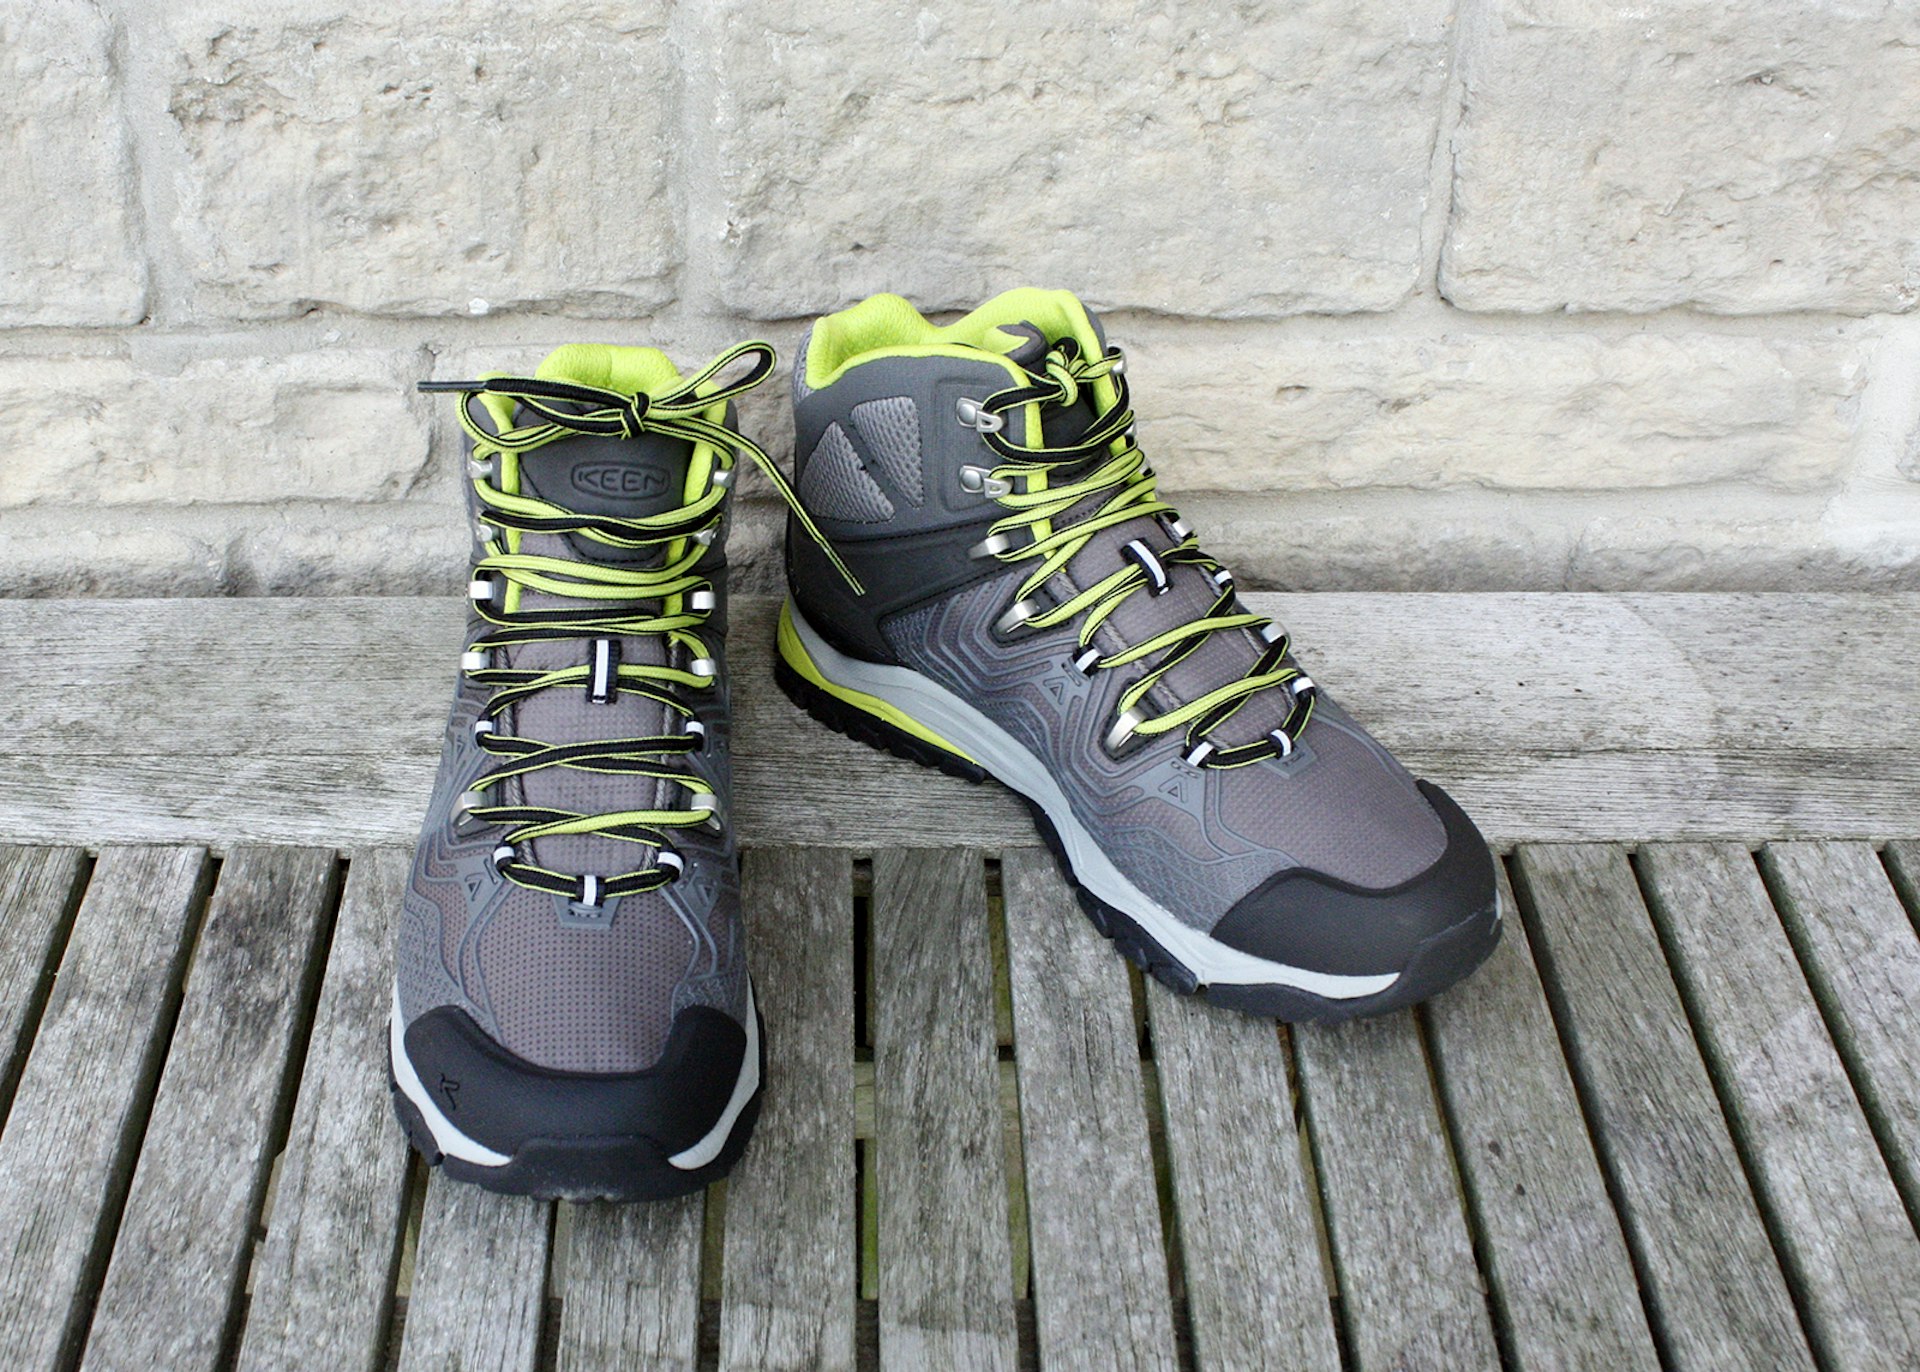 Keen Aphlex boots are great for hiking or travel in rugged locations © David Else / Lonely Planet